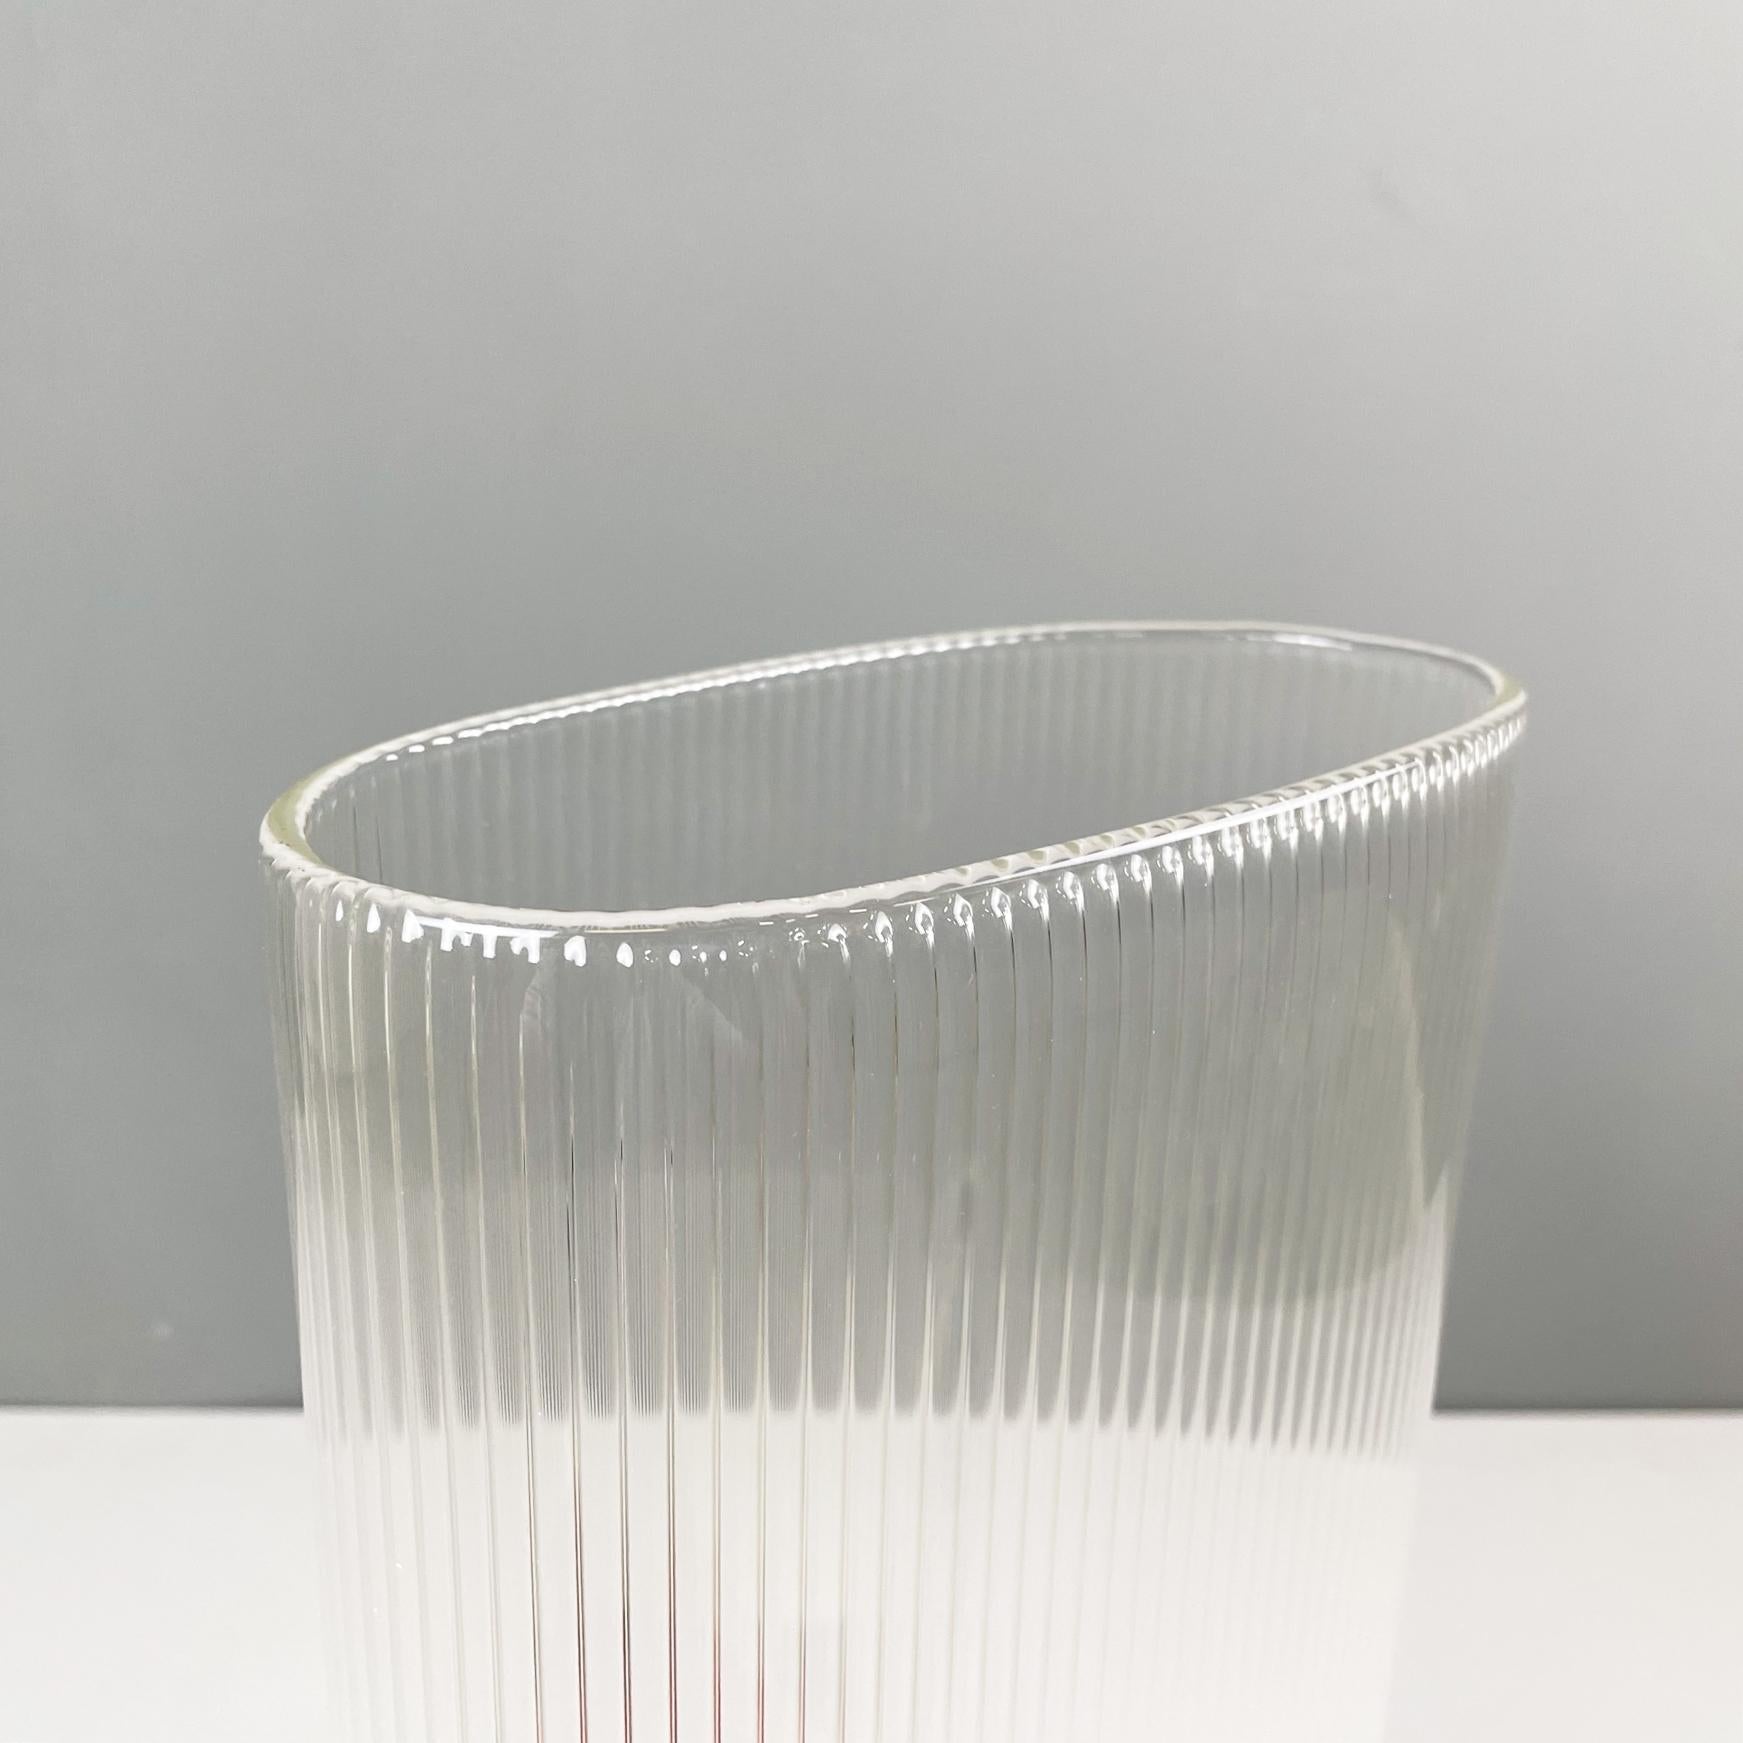 Late 20th Century Italian modern Glass vase with oval shape by Roberto Faccioli, 1990s For Sale